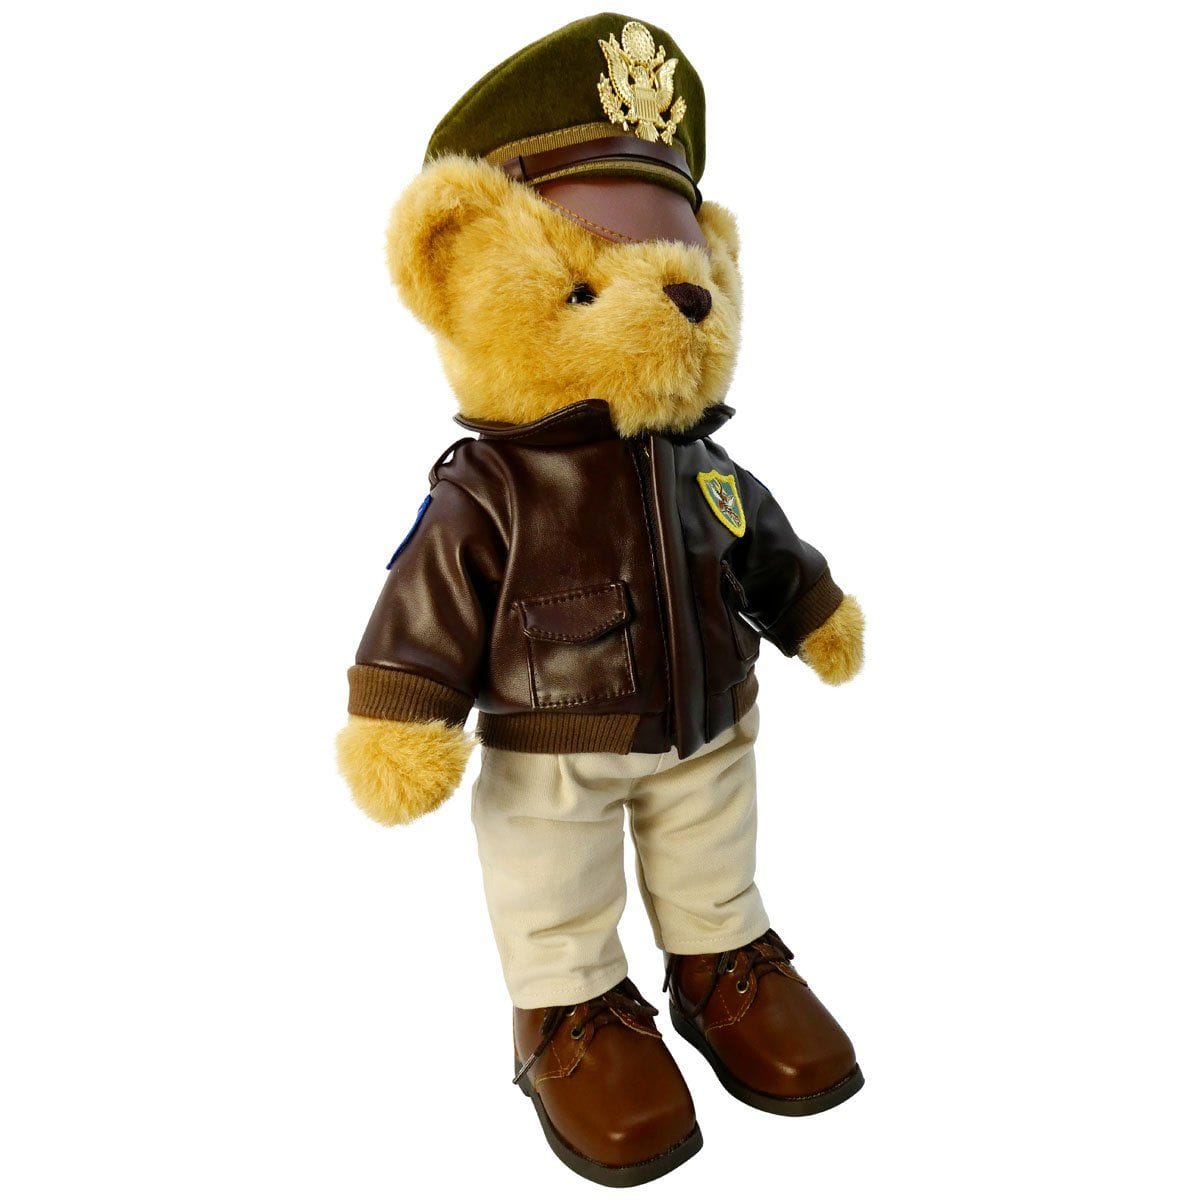 Pilot Toys Flying Tigers Museum Quality Plush Military Bear 16" Tall